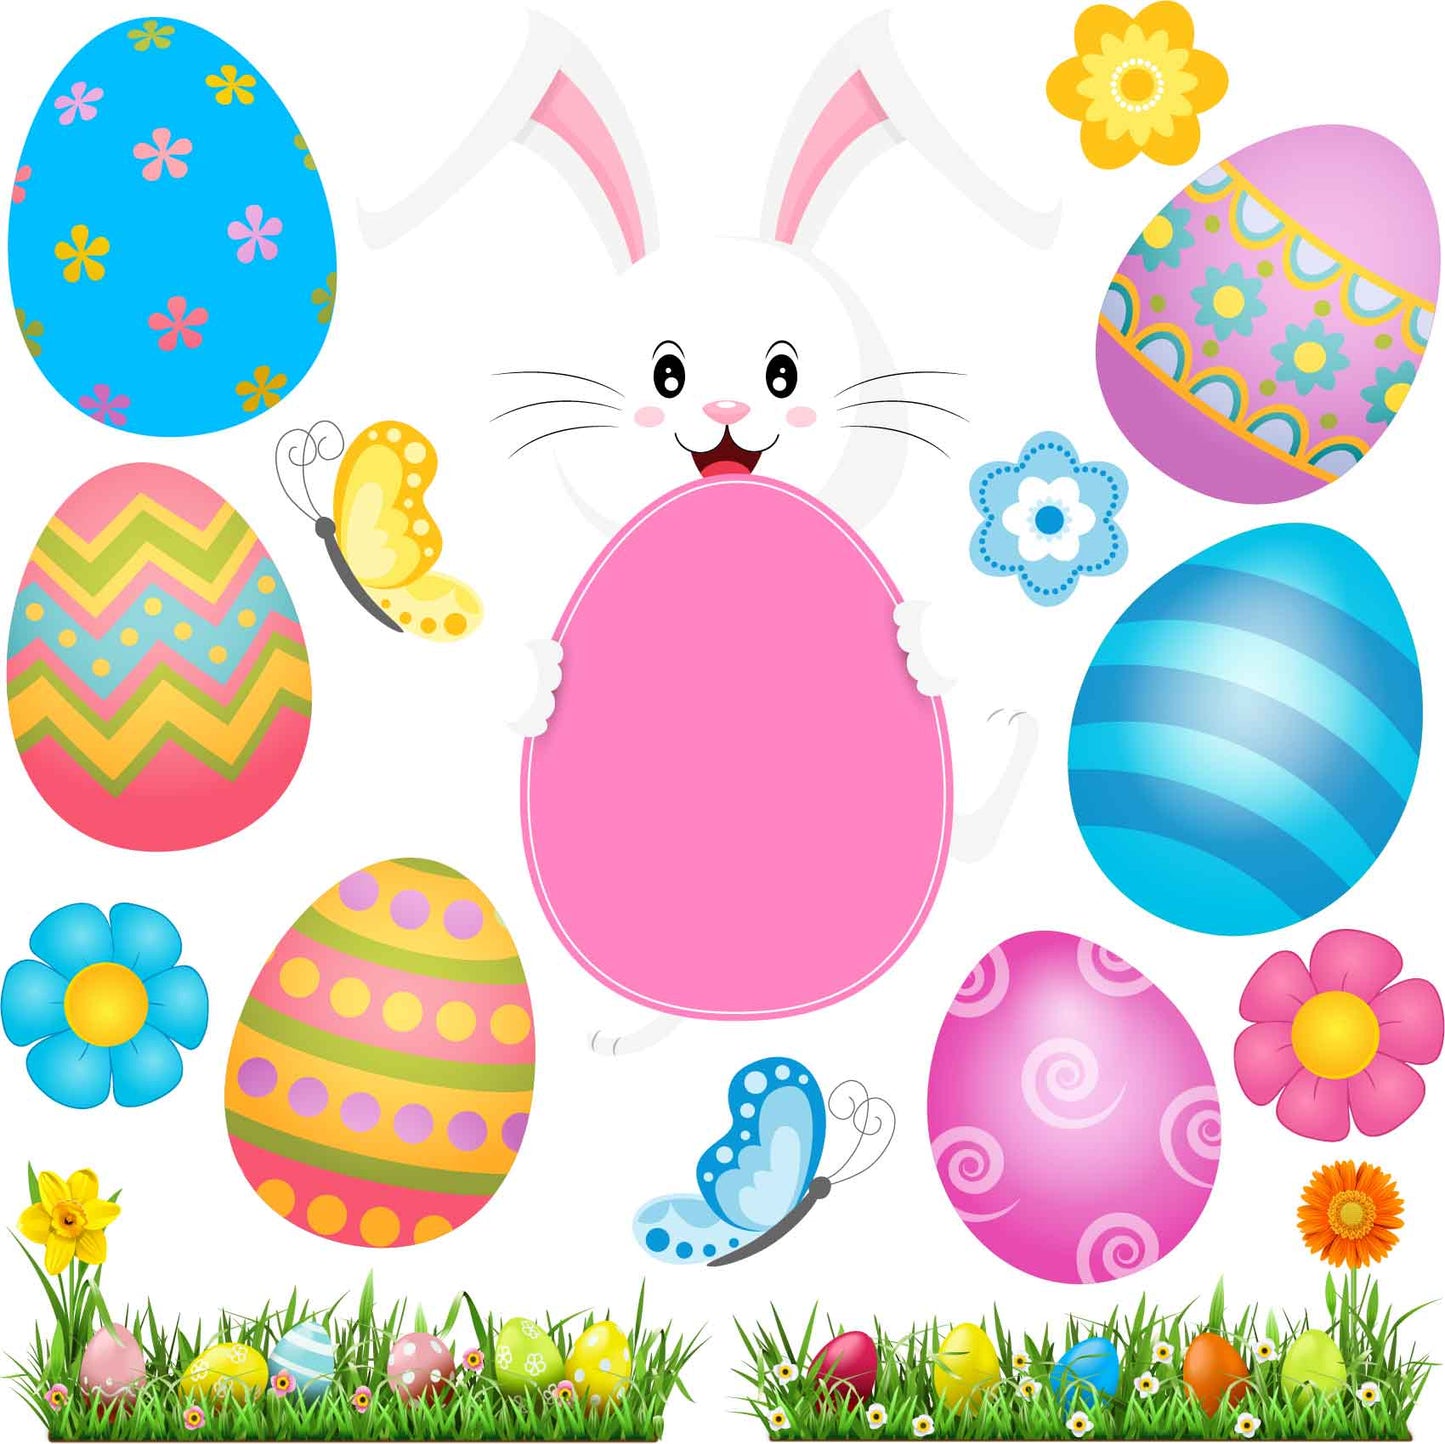 Happy Easter (No Words) - Half Sheet Misc. (Must Purchase 2 Half sheets - You Can Mix & Match)